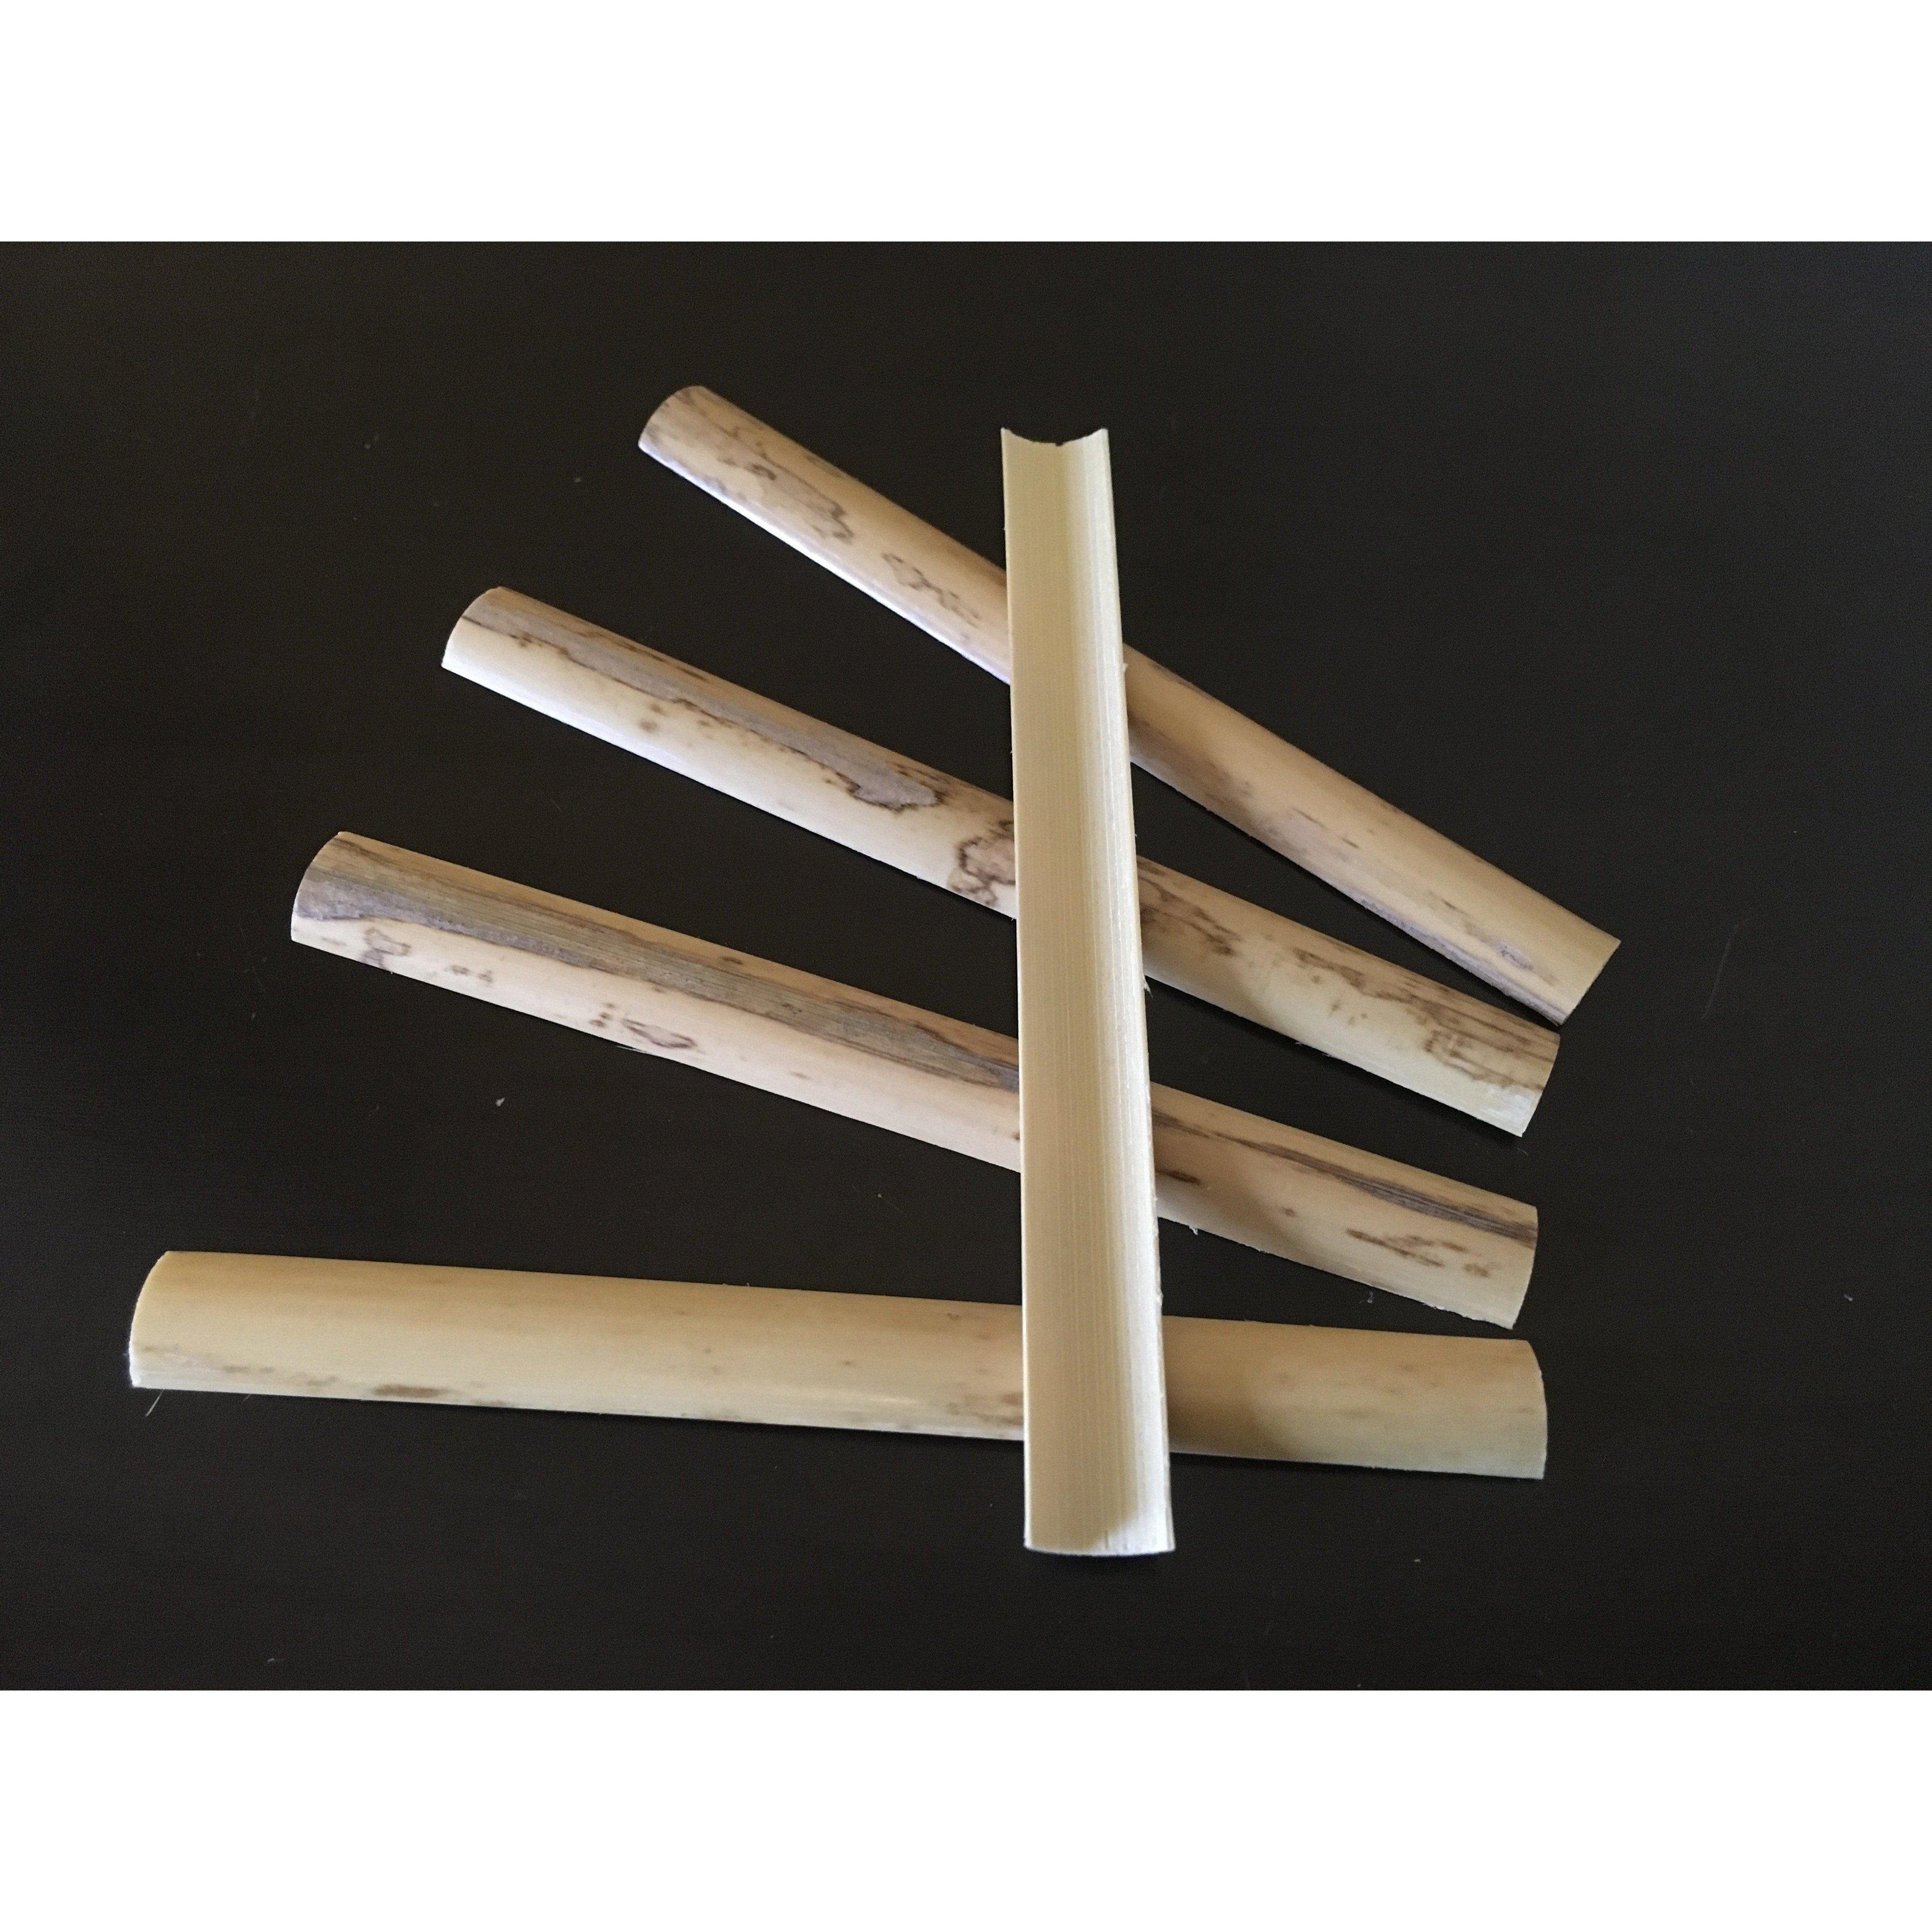 5 pieces of gouged English horn cane. Ready to be shaped and tied to become the best english horn reeds. 